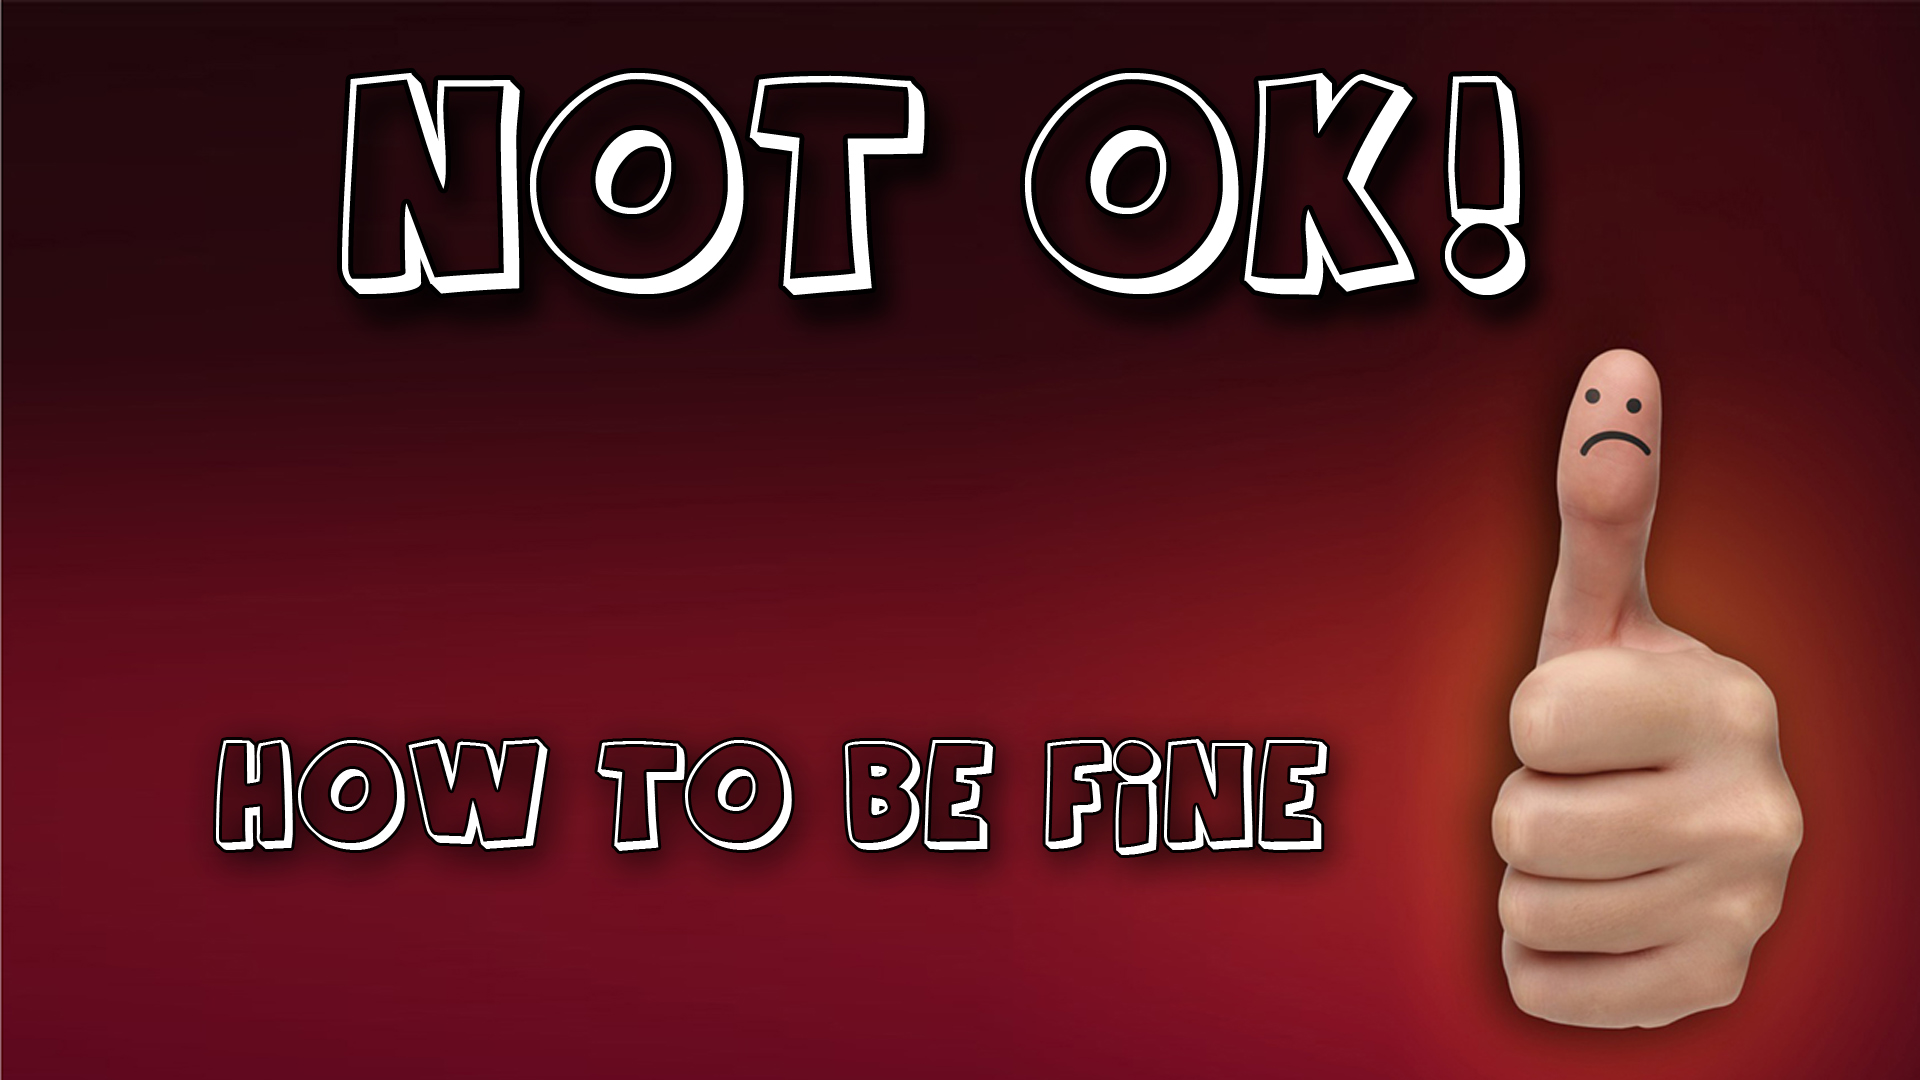 “Series: Not OK! … How to be fine”